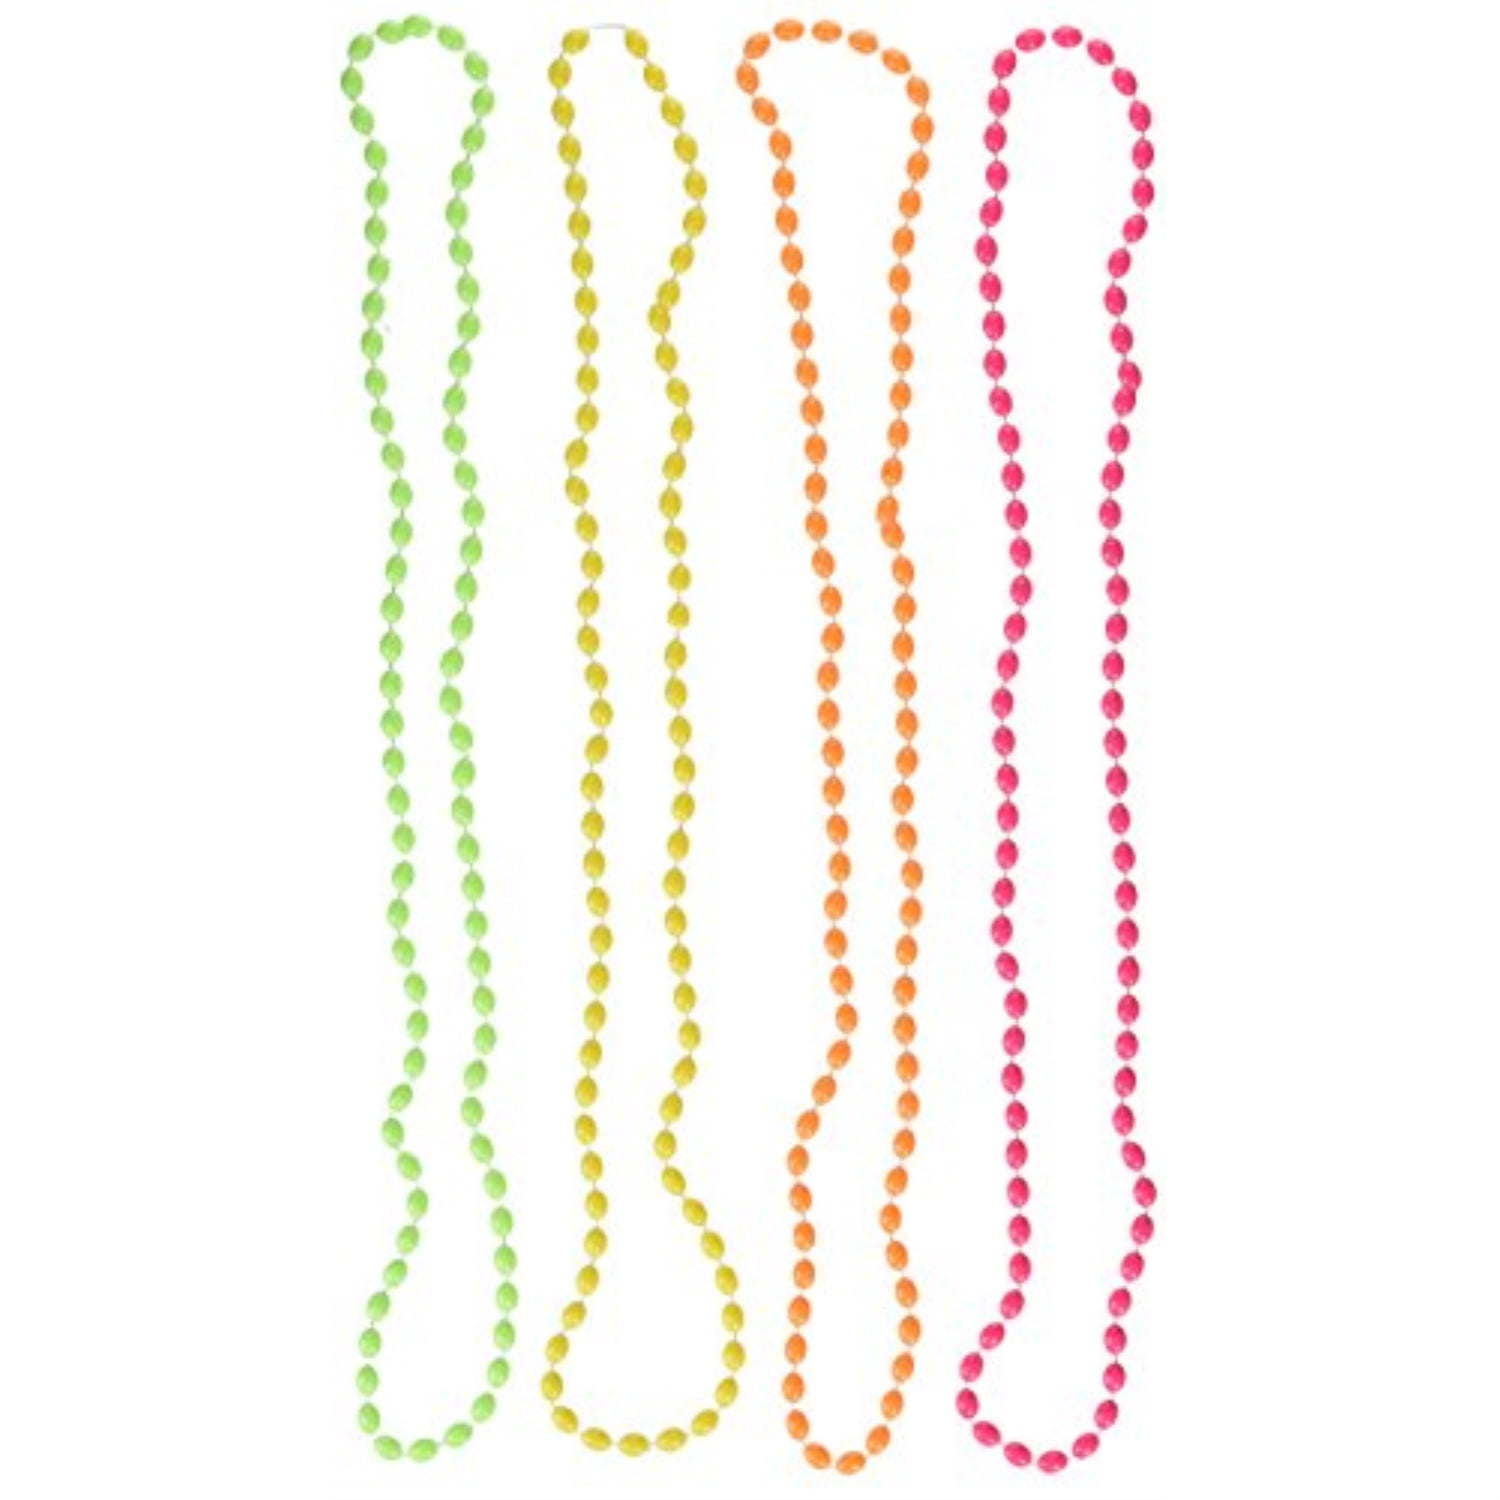 144 Ct Neon Bead Necklace TradeMart Inc 397480 Party Accessory 